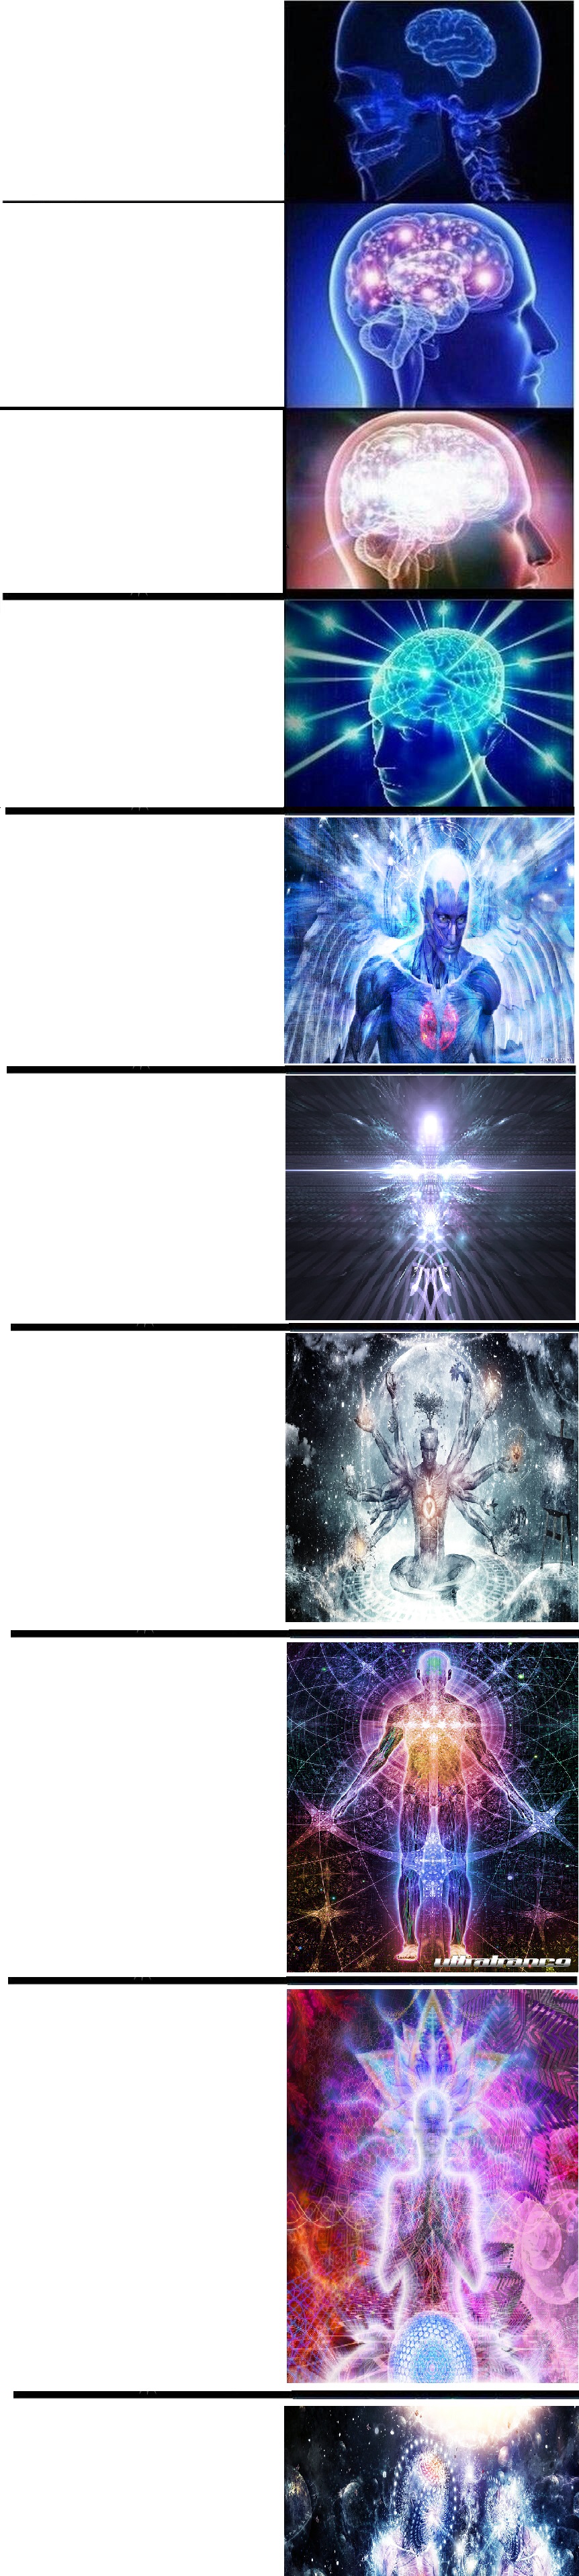 High Quality Expanding Brain (expanded) Blank Meme Template